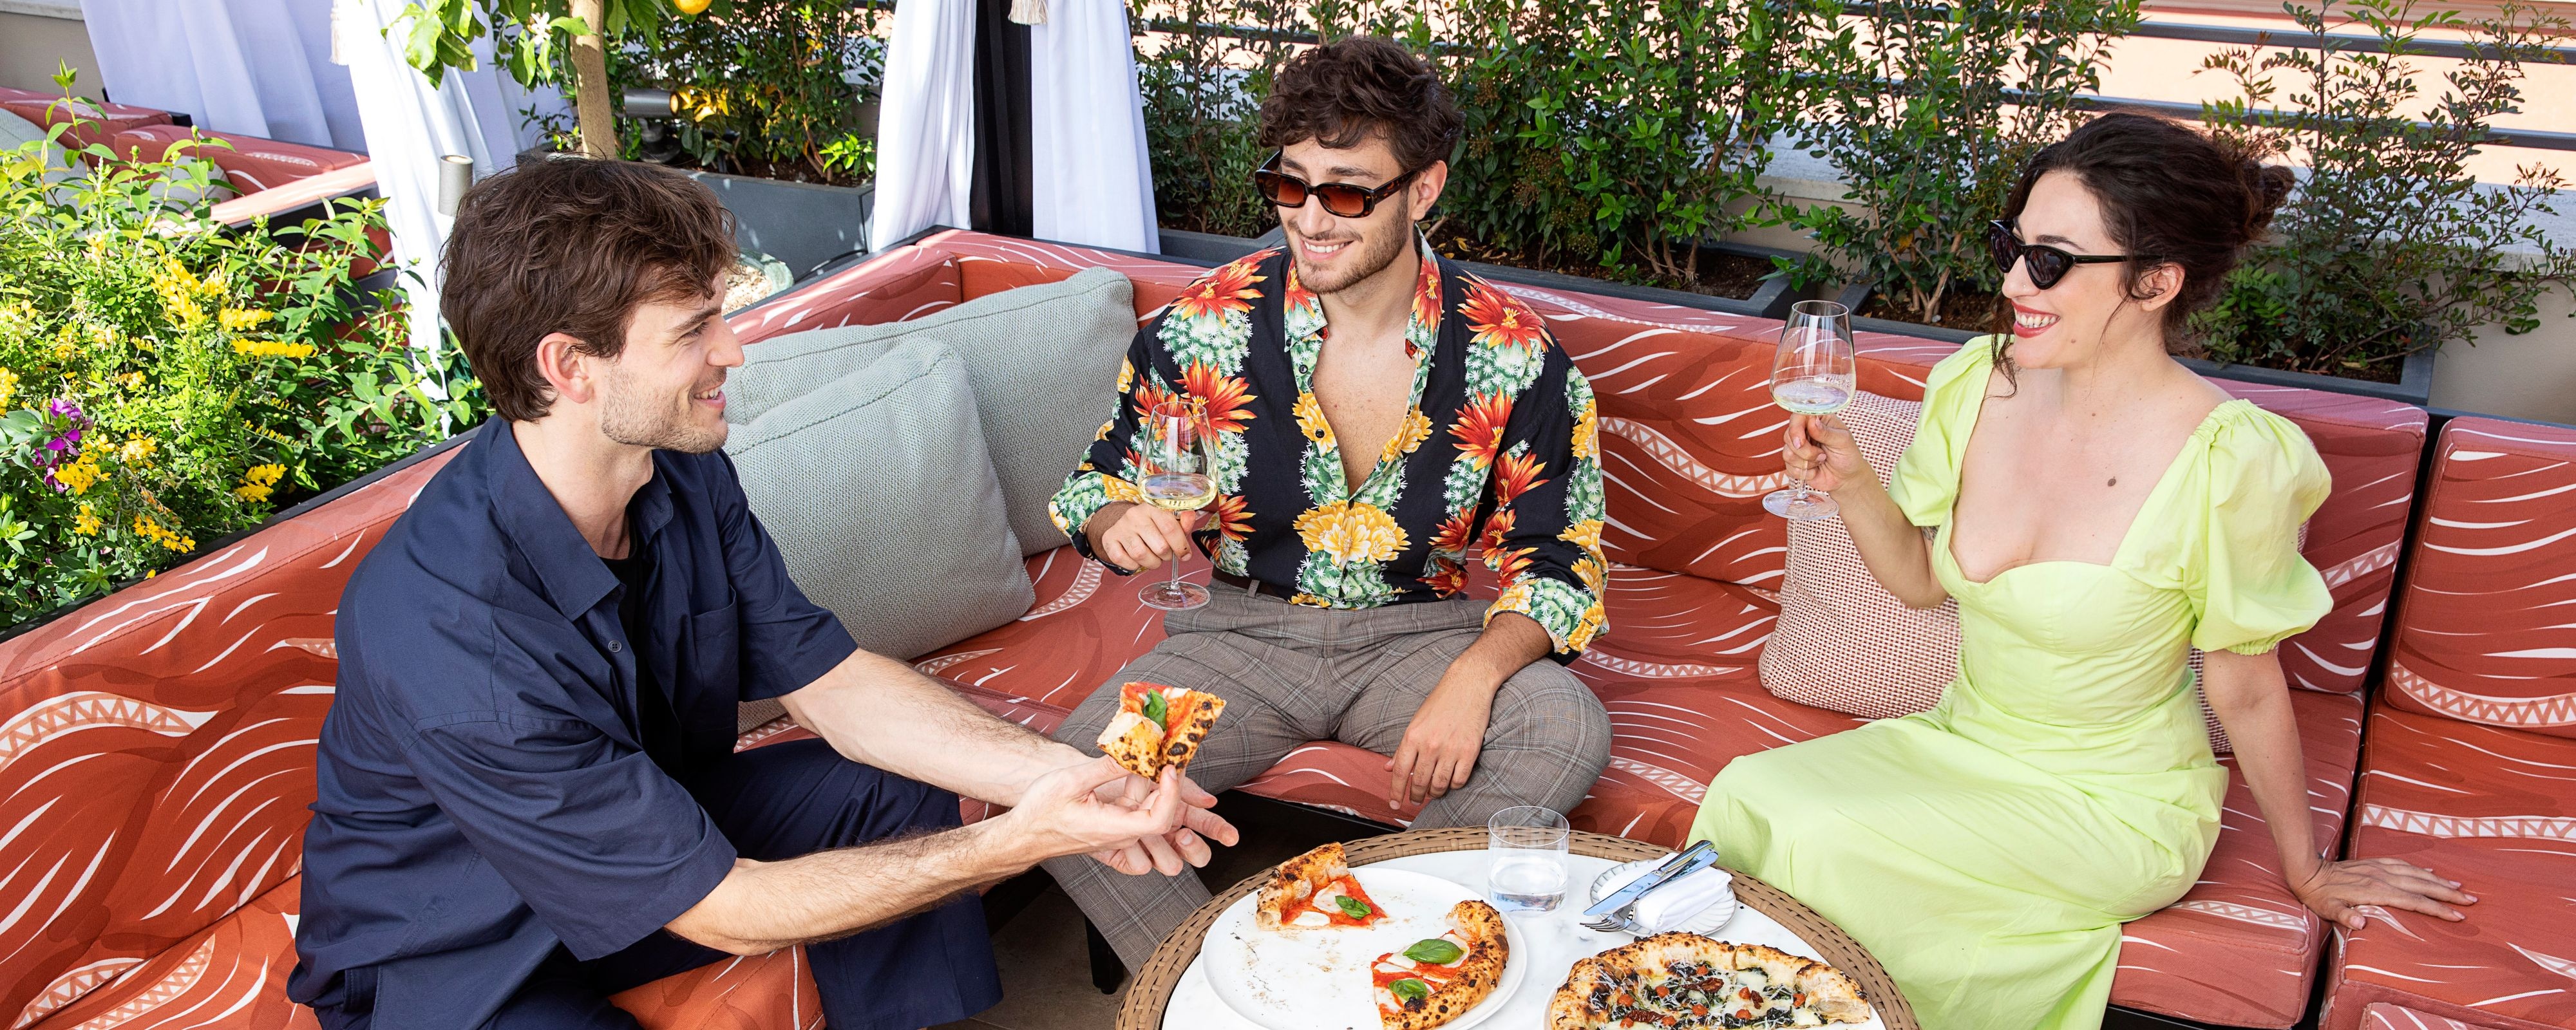 People eating pizza on an outdoor patio